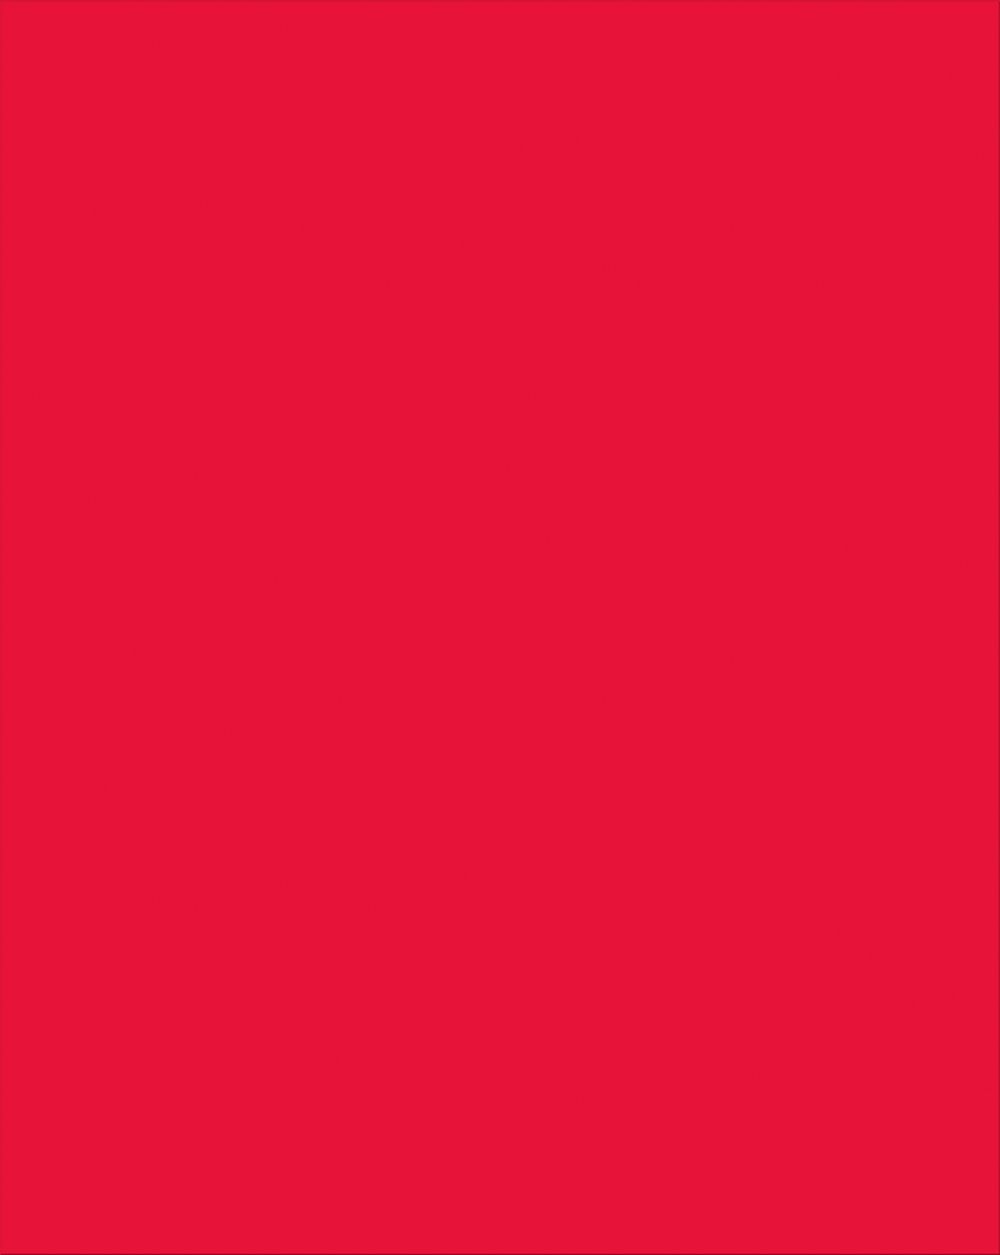 Bright Red Poster Board, 22x28-in.